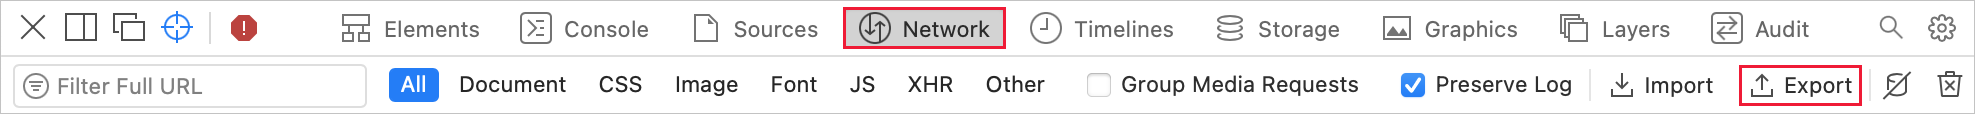 Screenshot of the Network tab with export option selected.